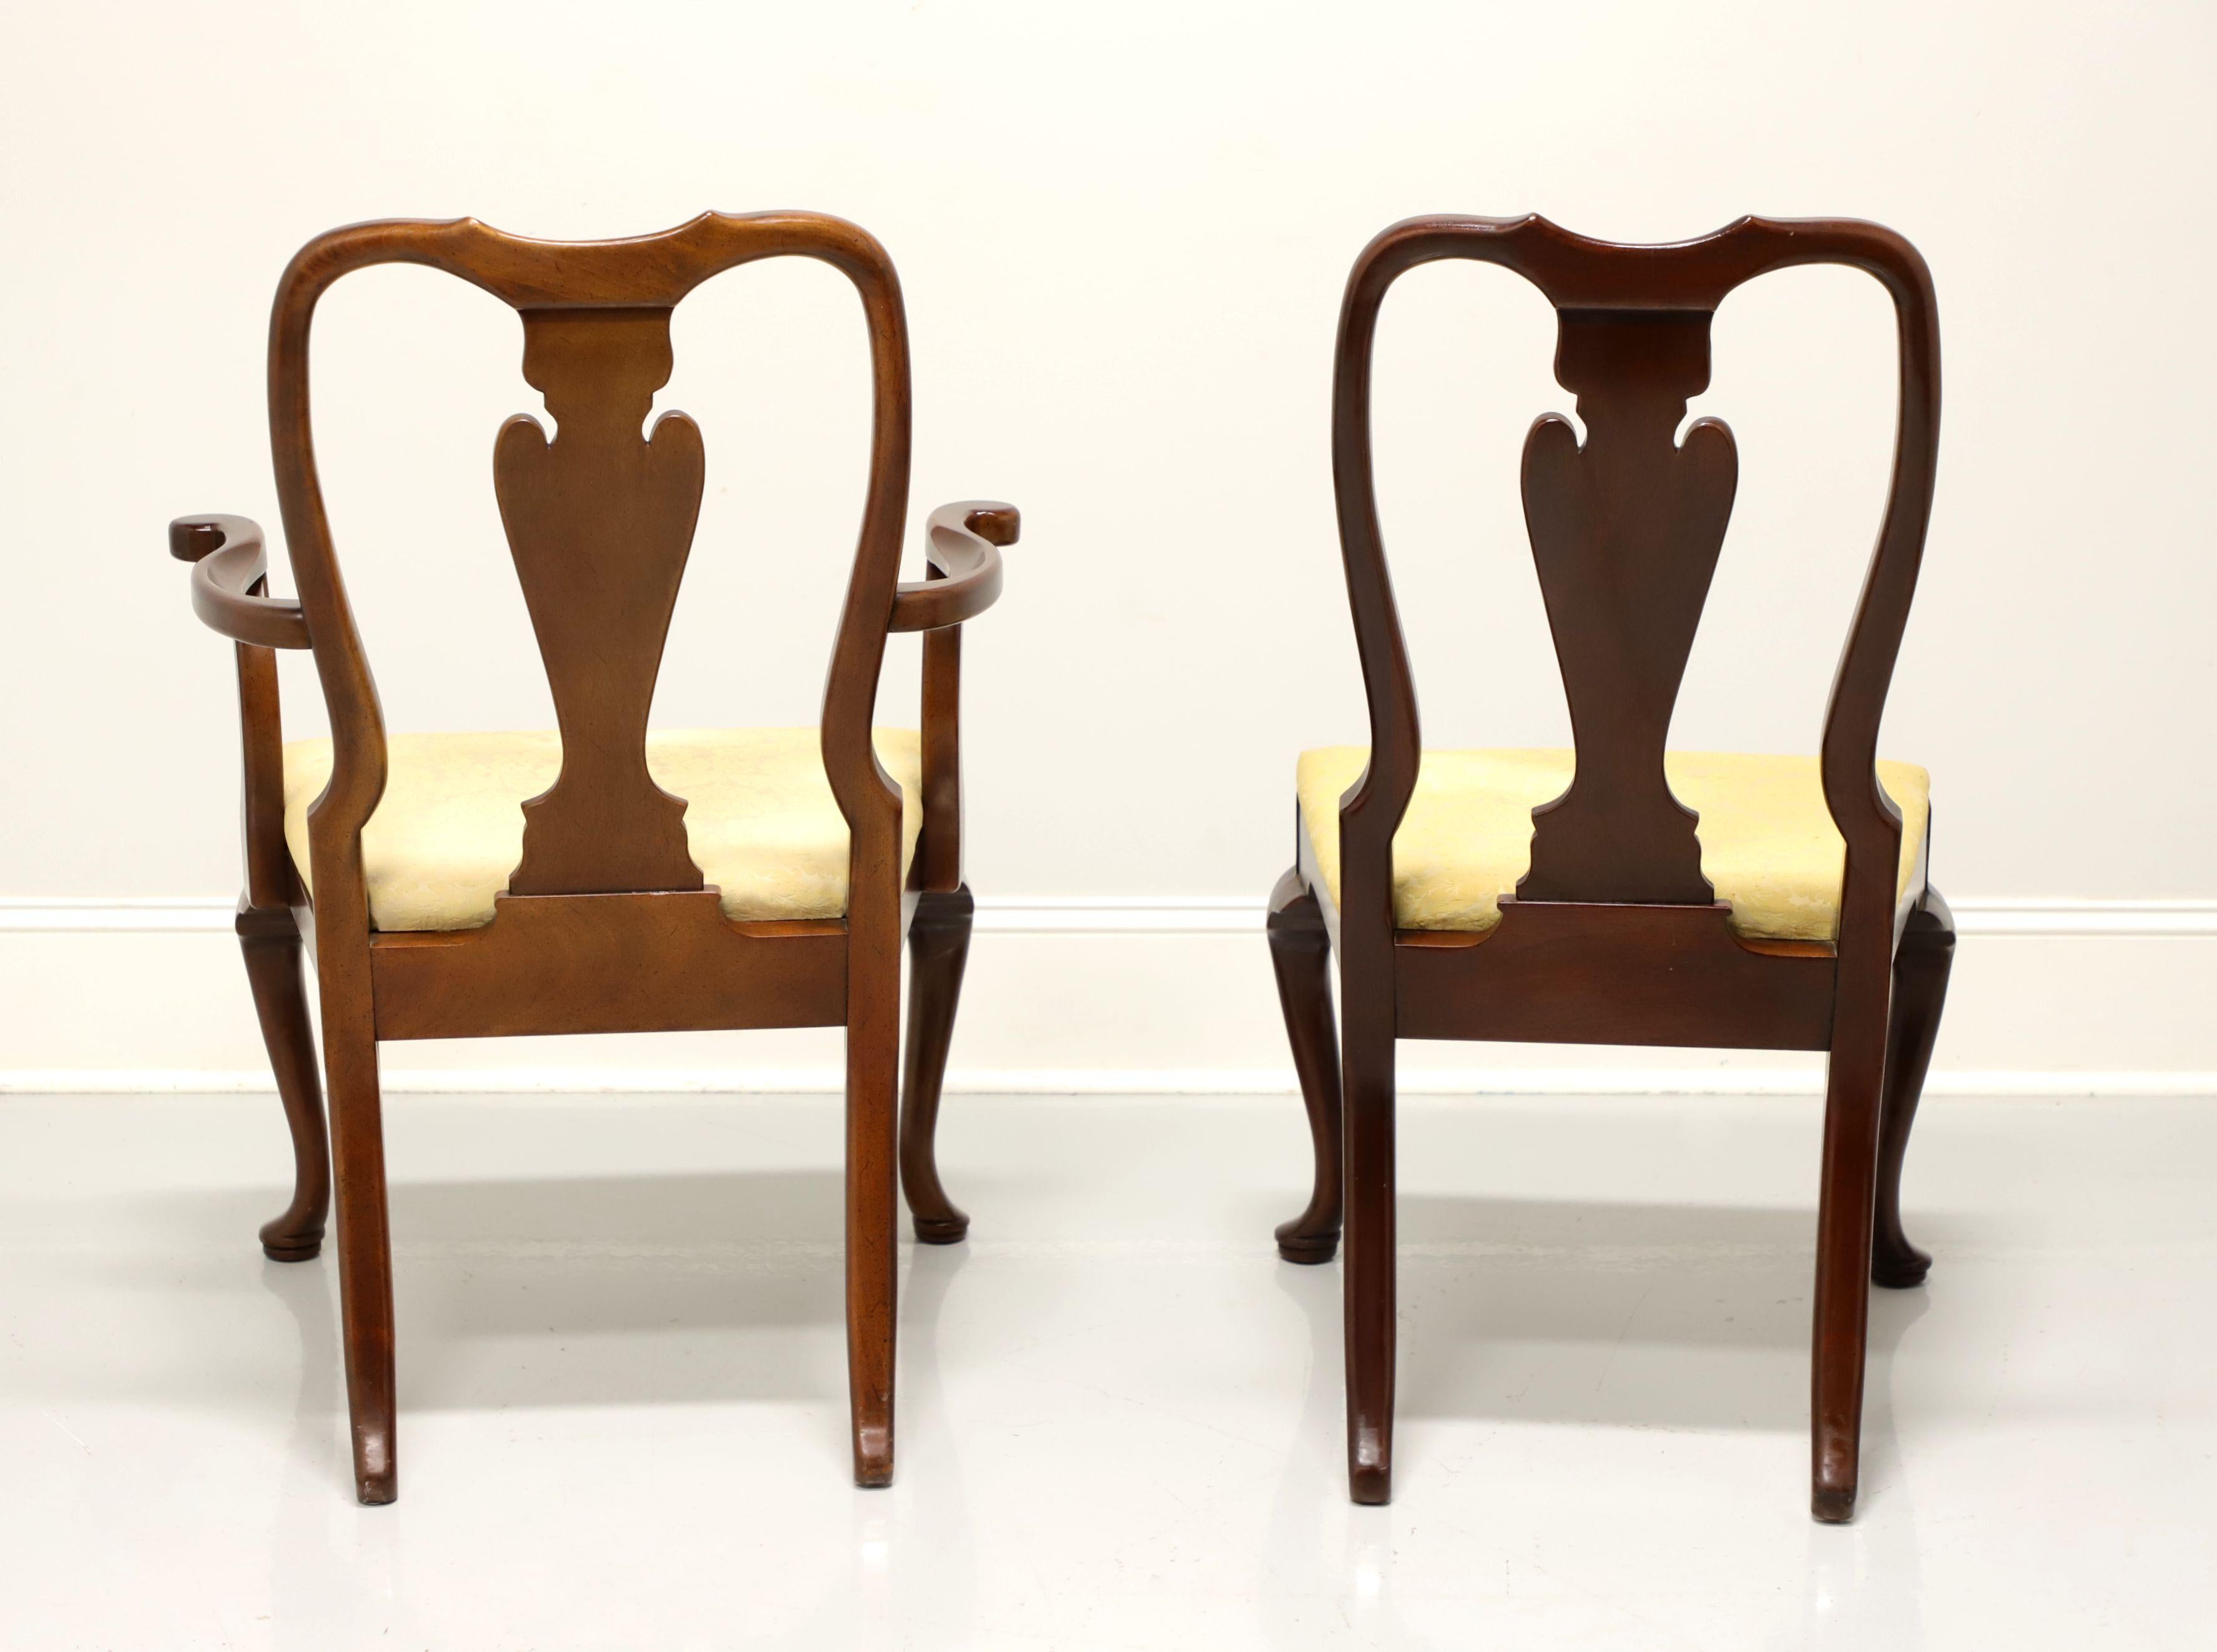 20th Century HICKORY CHAIR Mahogany Queen Anne Dining Chairs - Set of 6